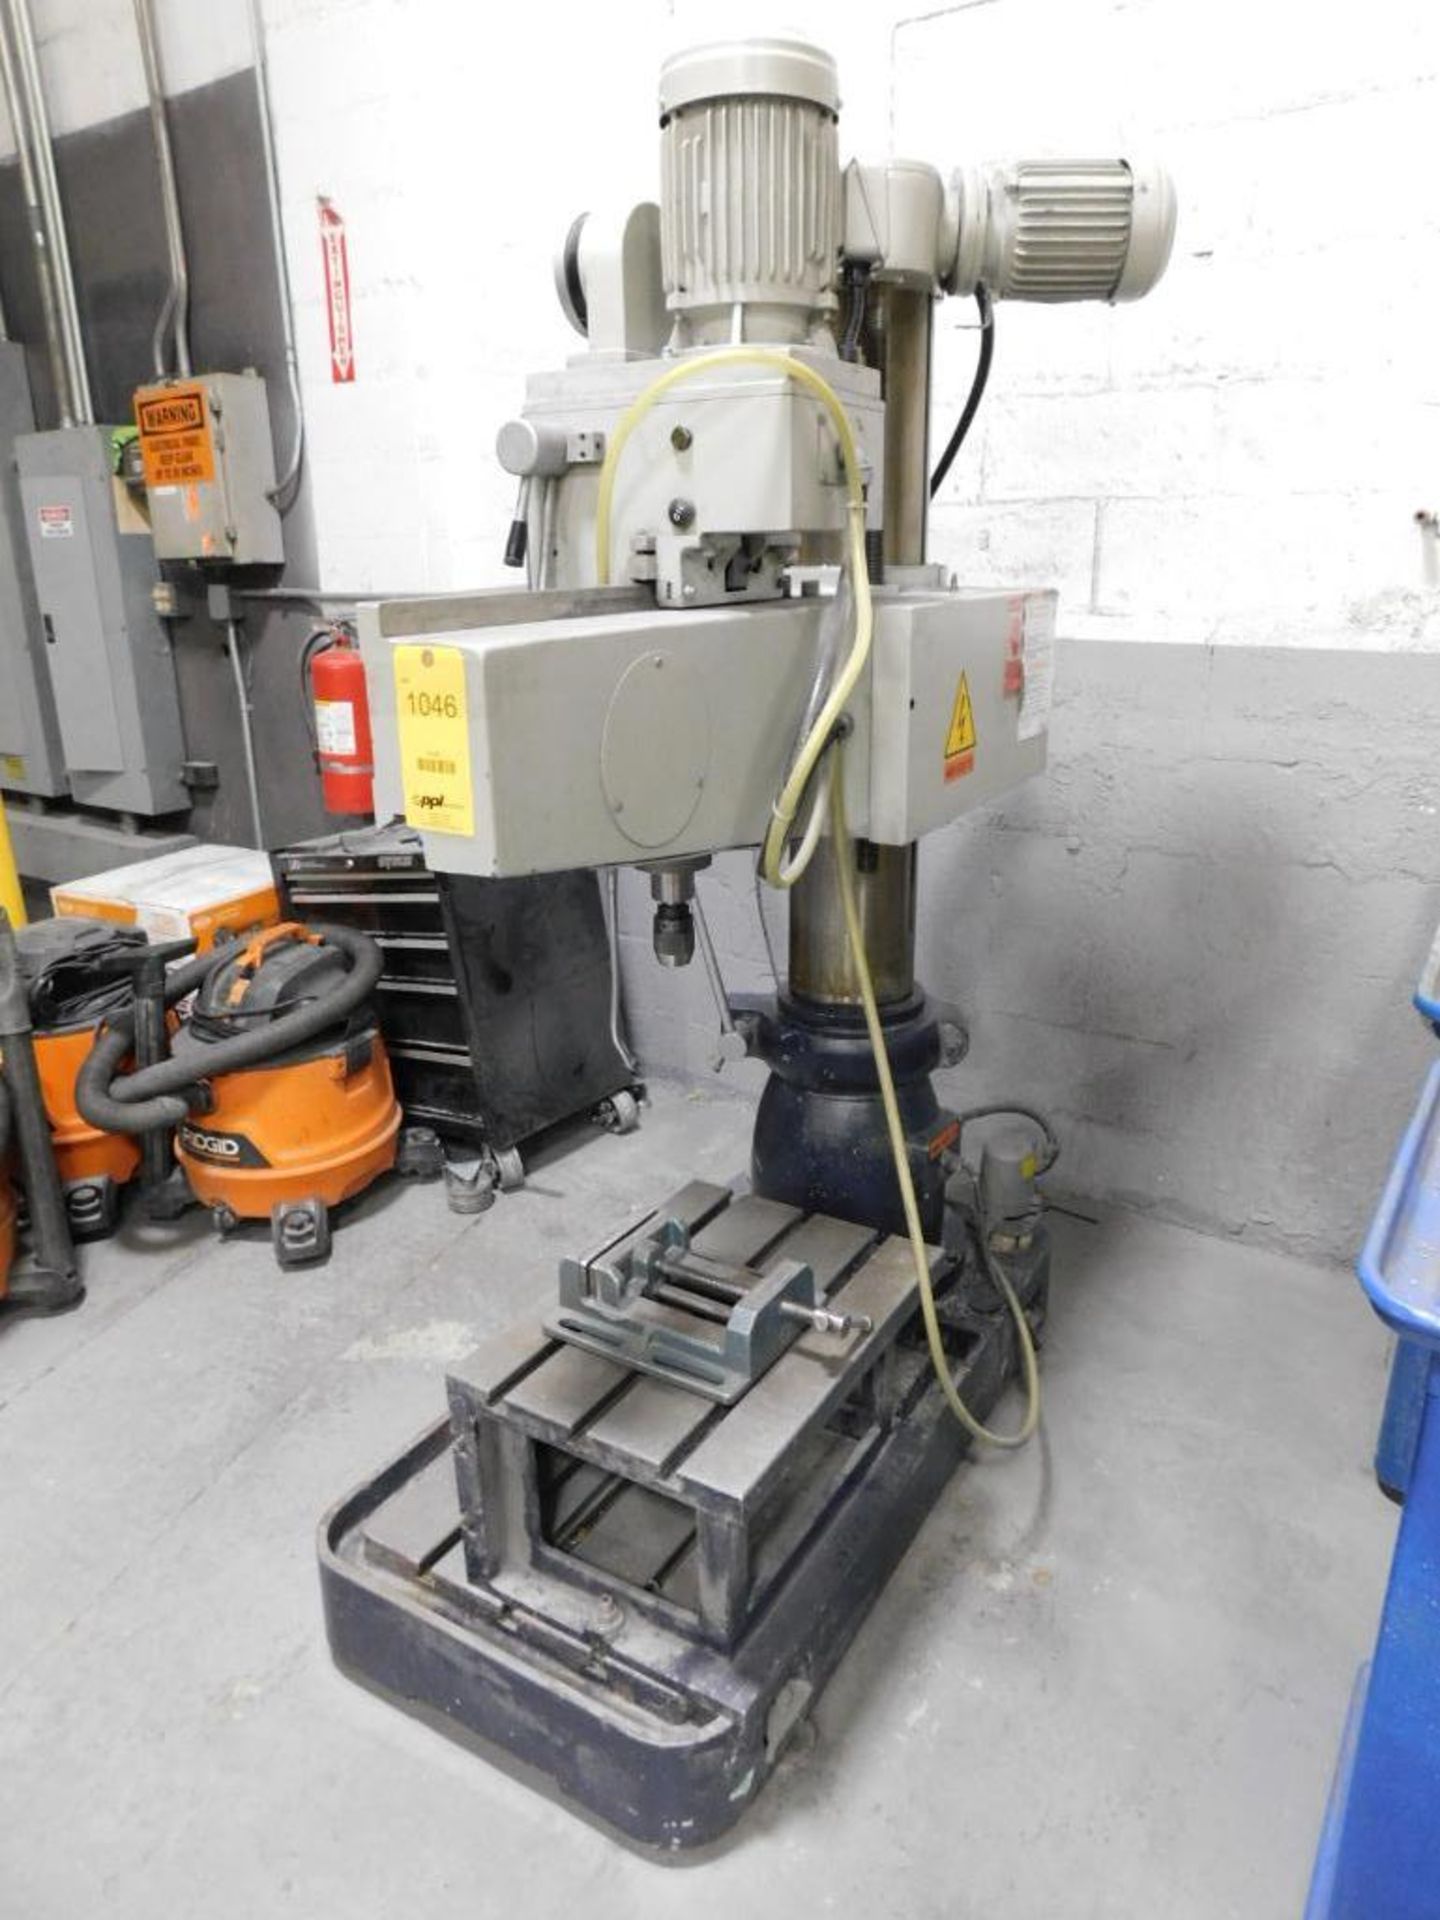 Willis RD-750 Radial Drill, S/N TY-1910022 (2019) - Image 2 of 7